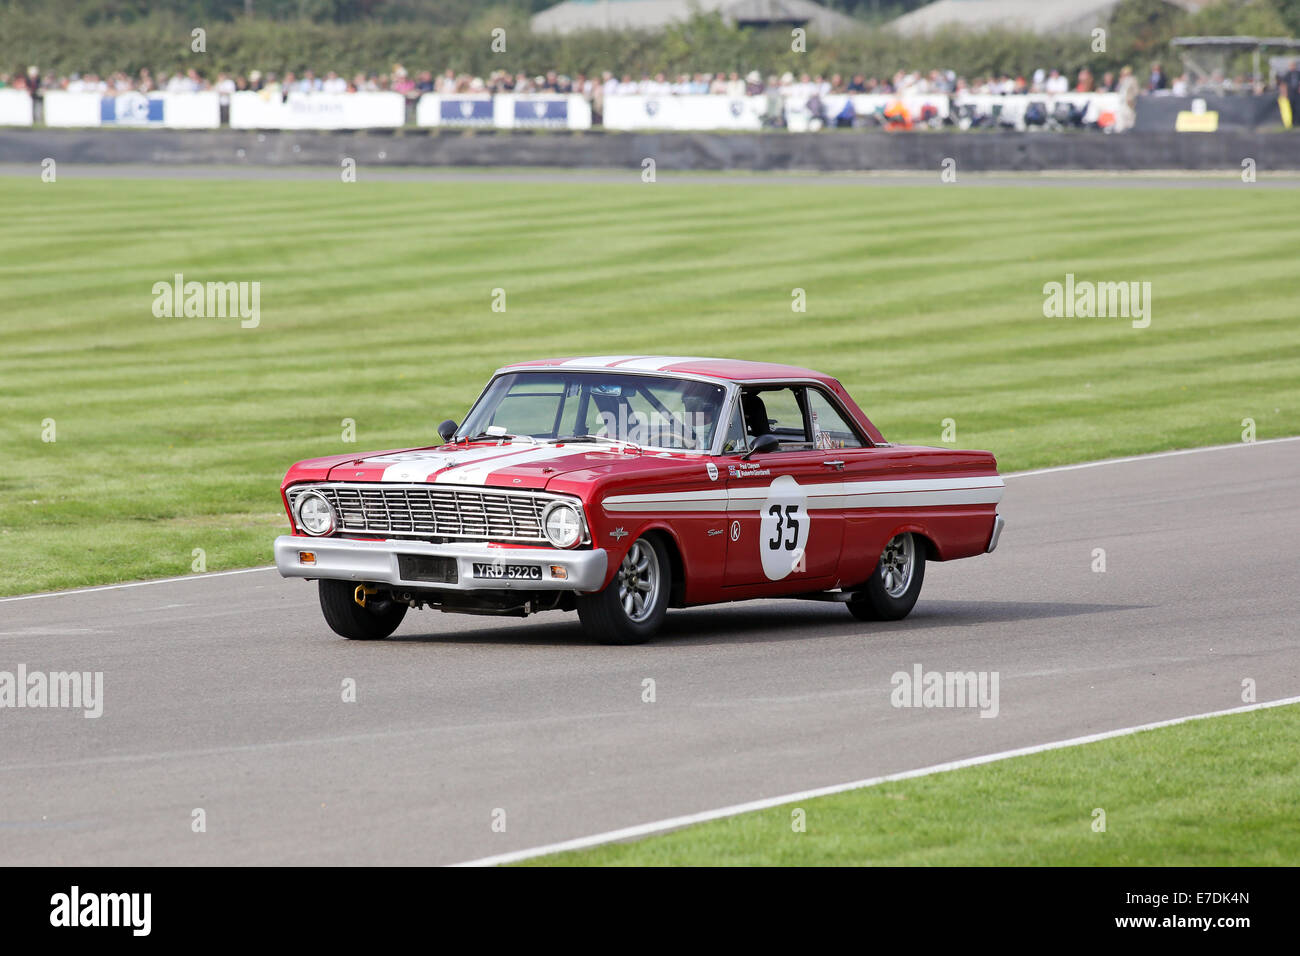 Chichester, West Sussex, UK. 13th Sep, 2014. Pictures from the Goodwood Revival 2014 - The Shelby Cup - A race for saloon cars powered by small-block V8 engines on the 60th anniversary of the small-block V8 engine. A large number of Ford Mustangs mariking the car's 50th anniversary took on other American classics such as Ford Falcon, Plymouth Barracuda, Mercury Comet Cyclone and Dodge Dart. Picture shows: a 1964 Ford Falcon Spirit driven by Paul Clayson Credit:  Oliver Dixon/Alamy Live News Stock Photo